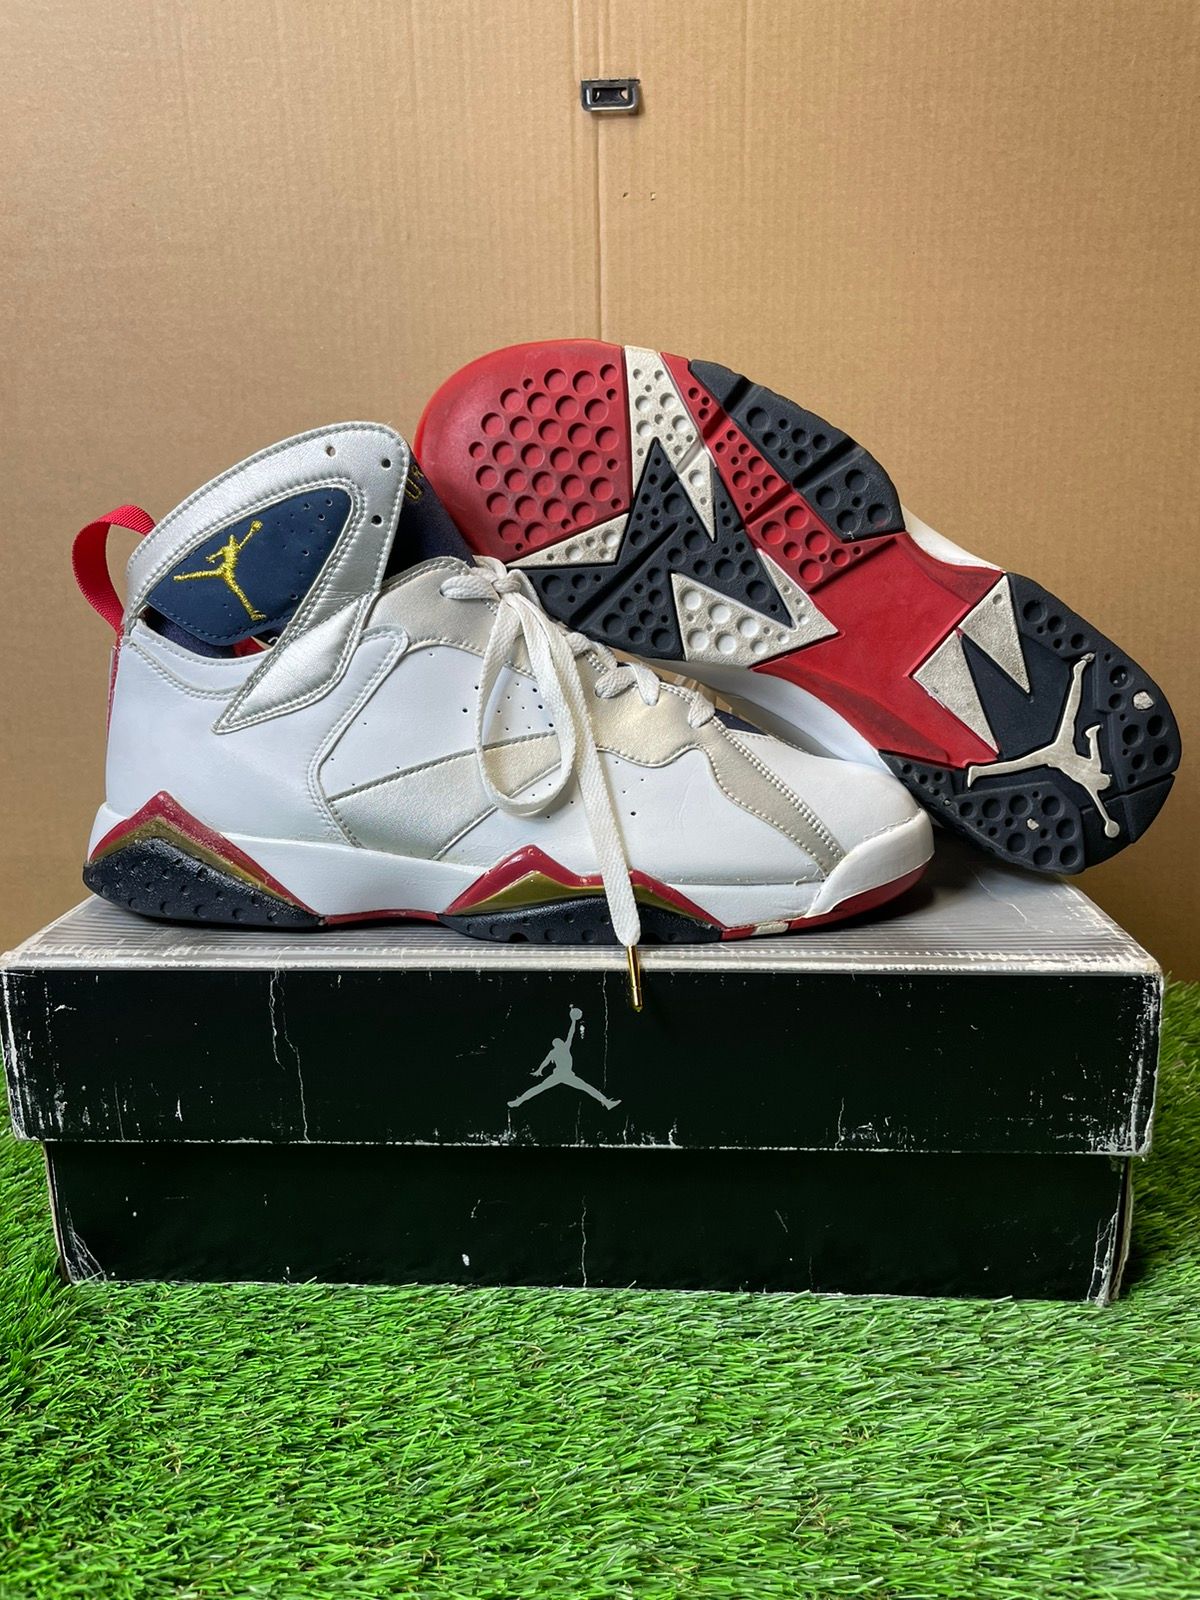 Pre-owned Jordan Brand 7 Olympic Size 12 Used Shoes In White